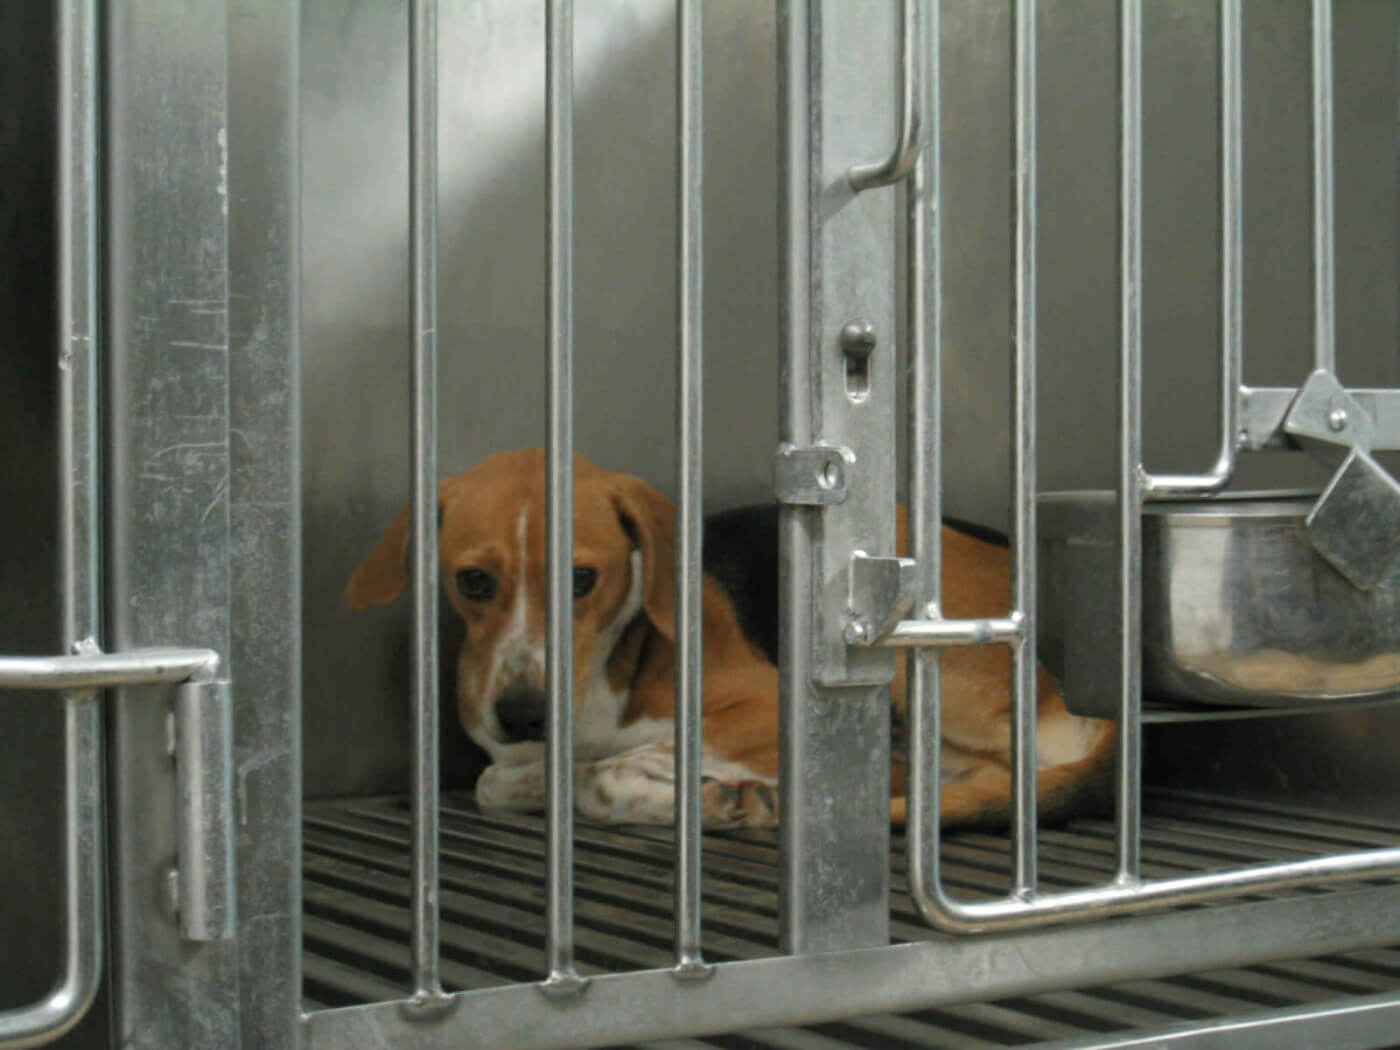 beagle imprisoned behind bars in a laboratory for experimentation